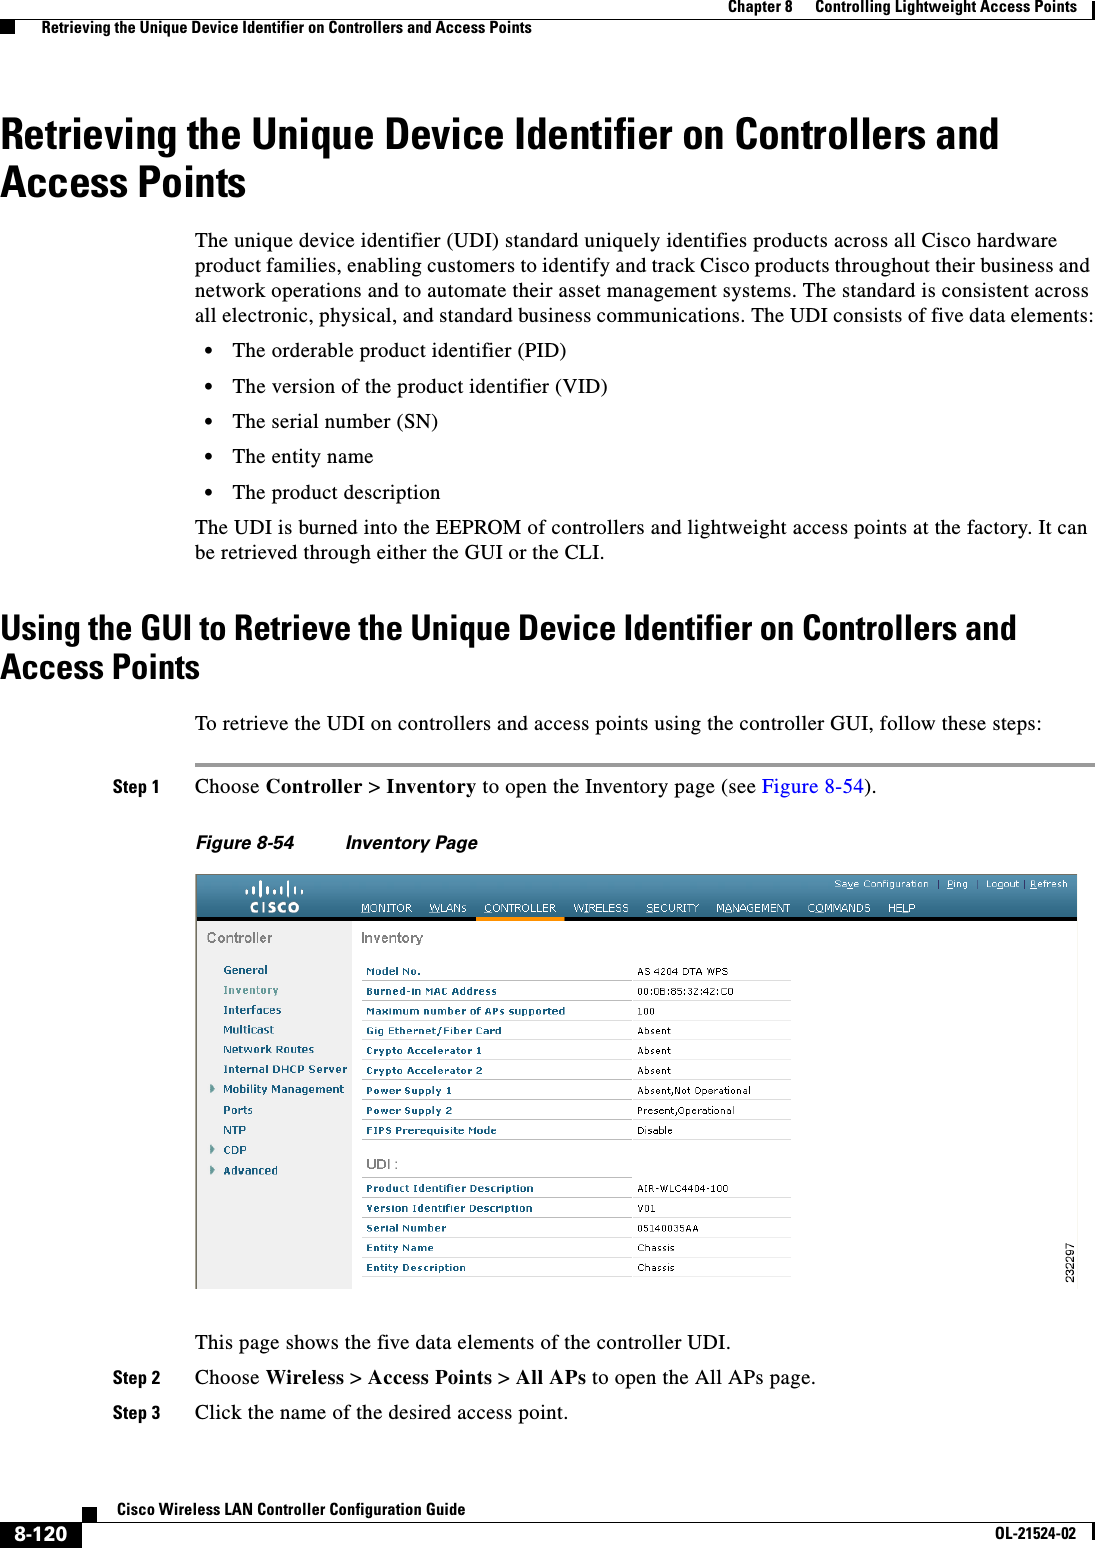  8-120Cisco Wireless LAN Controller Configuration GuideOL-21524-02Chapter 8      Controlling Lightweight Access Points  Retrieving the Unique Device Identifier on Controllers and Access PointsRetrieving the Unique Device Identifier on Controllers and Access PointsThe unique device identifier (UDI) standard uniquely identifies products across all Cisco hardware product families, enabling customers to identify and track Cisco products throughout their business and network operations and to automate their asset management systems. The standard is consistent across all electronic, physical, and standard business communications. The UDI consists of five data elements:  • The orderable product identifier (PID)  • The version of the product identifier (VID)  • The serial number (SN)  • The entity name  • The product descriptionThe UDI is burned into the EEPROM of controllers and lightweight access points at the factory. It can be retrieved through either the GUI or the CLI.Using the GUI to Retrieve the Unique Device Identifier on Controllers and Access PointsTo retrieve the UDI on controllers and access points using the controller GUI, follow these steps:Step 1 Choose Controller &gt; Inventory to open the Inventory page (see Figure 8-54).Figure 8-54 Inventory PageThis page shows the five data elements of the controller UDI.Step 2 Choose Wireless &gt; Access Points &gt; All APs to open the All APs page.Step 3 Click the name of the desired access point.